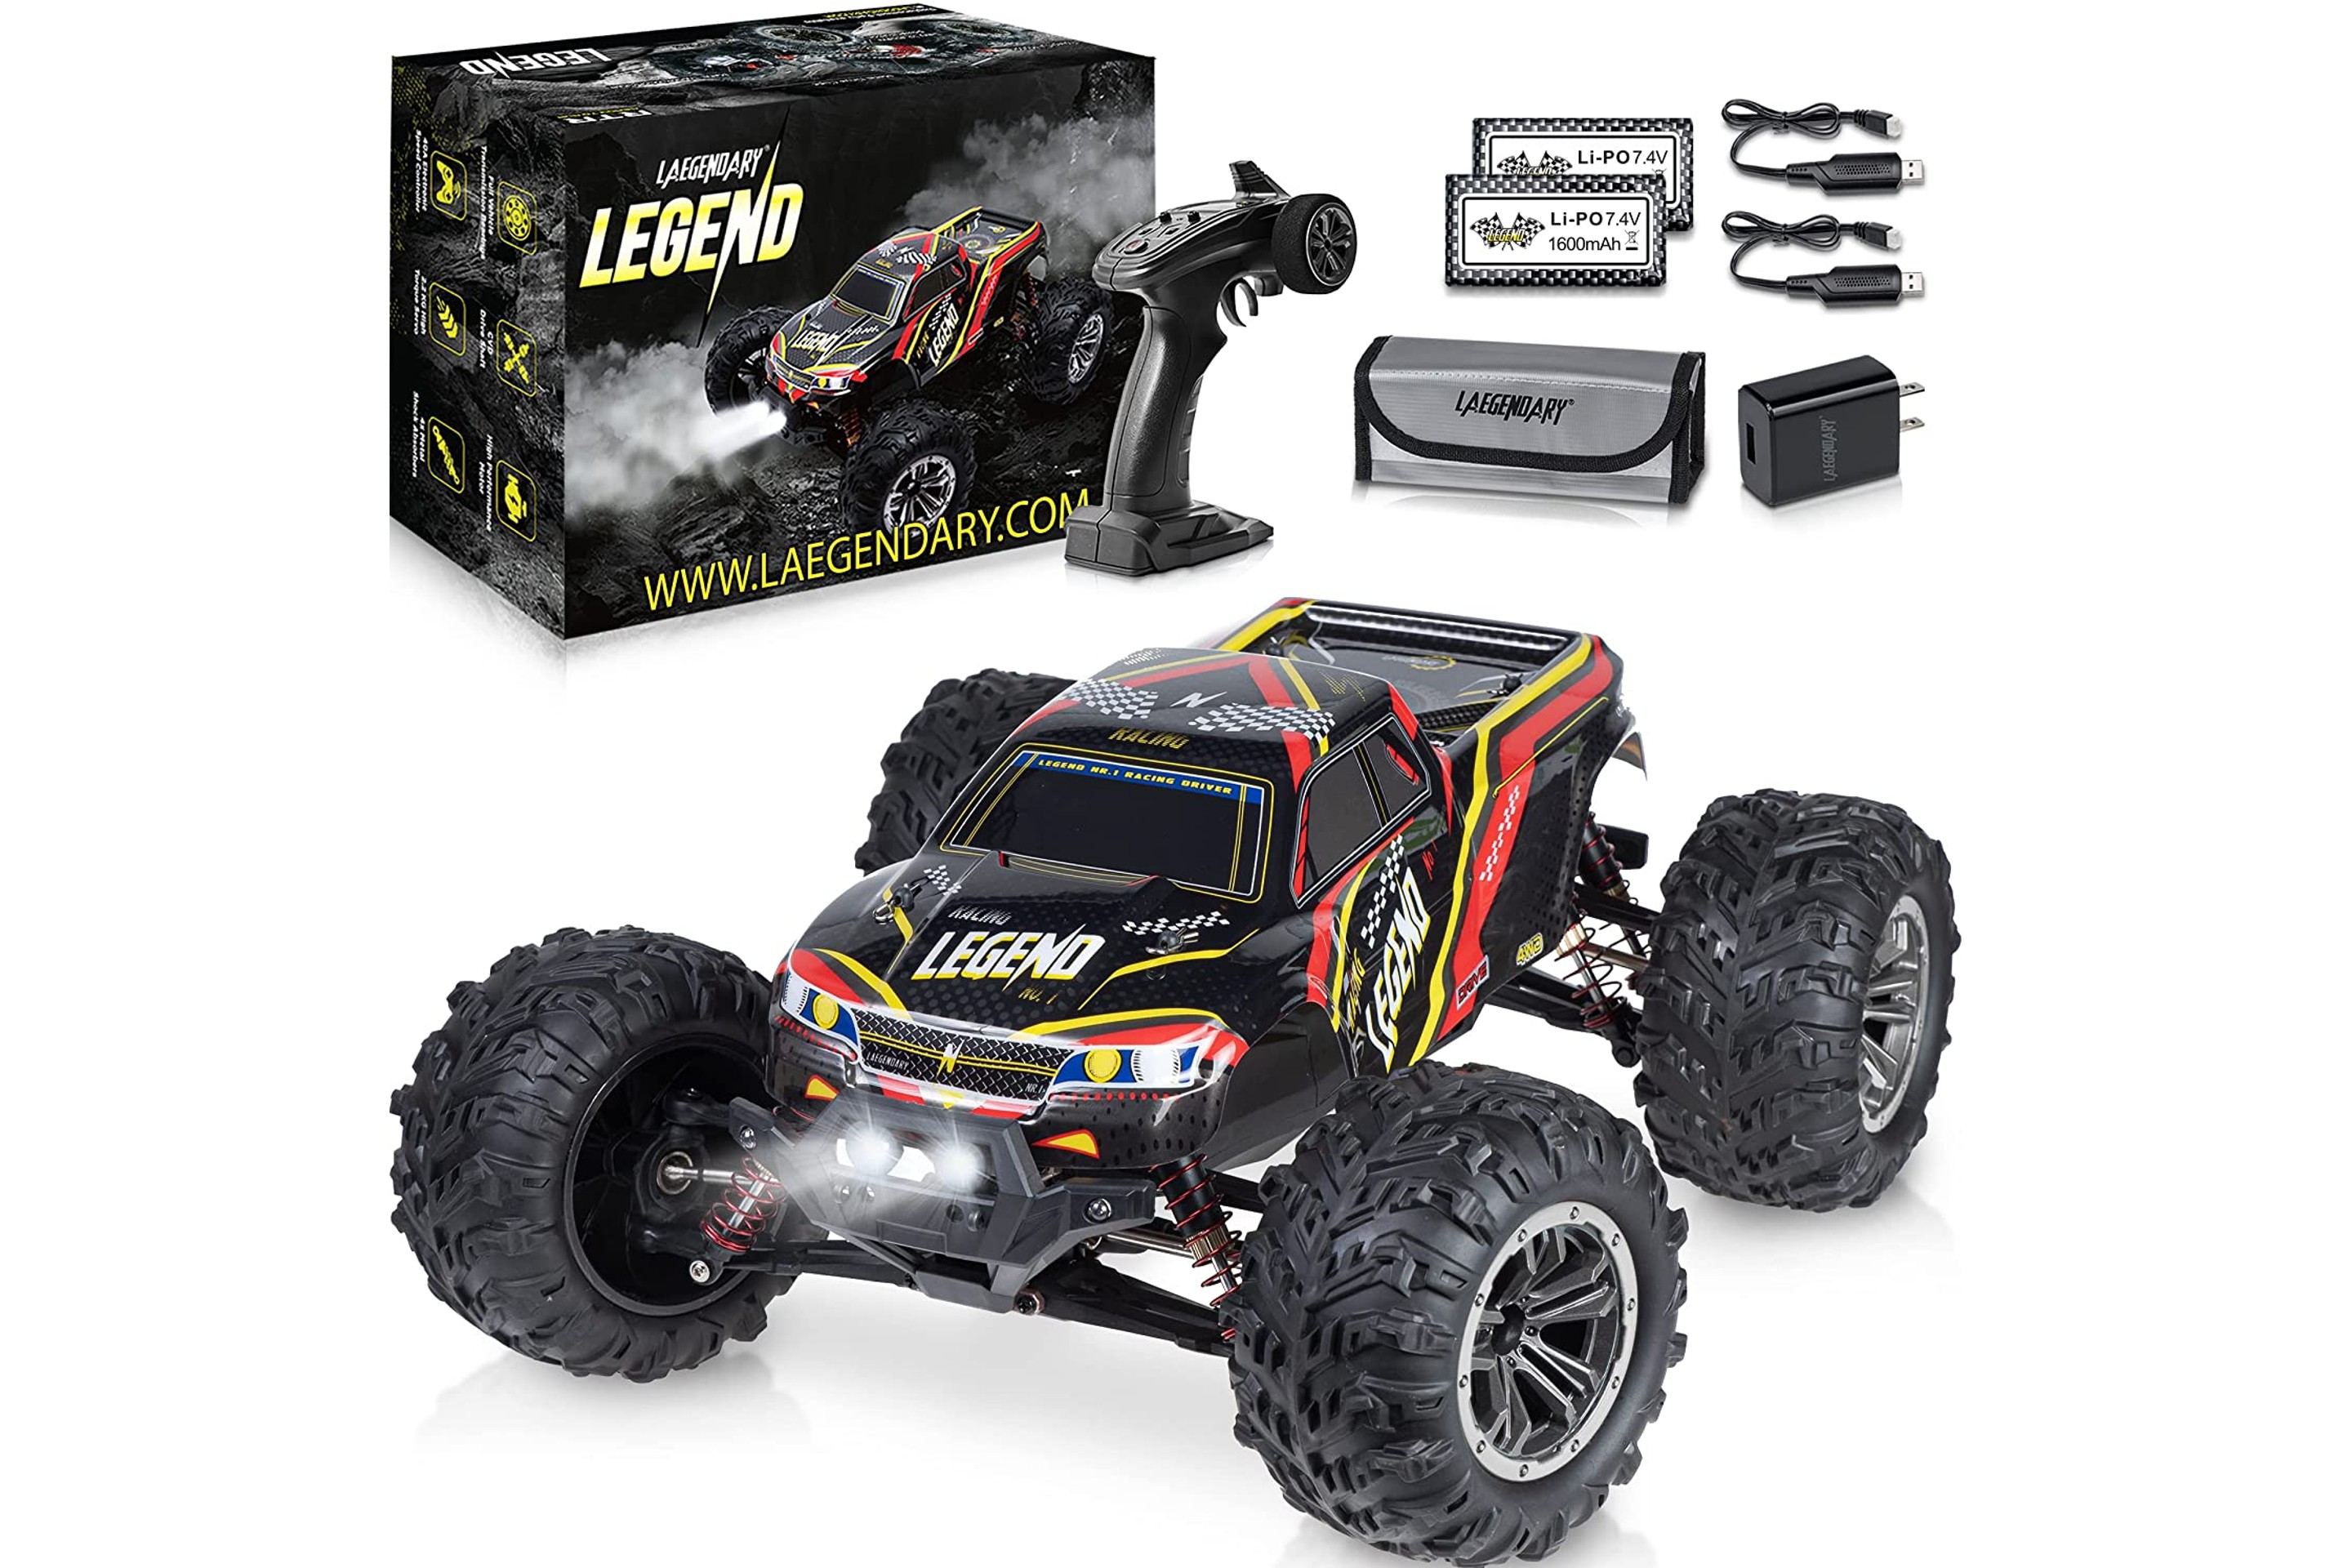 Save 50% on This Remote-Controlled Toy Car | Money